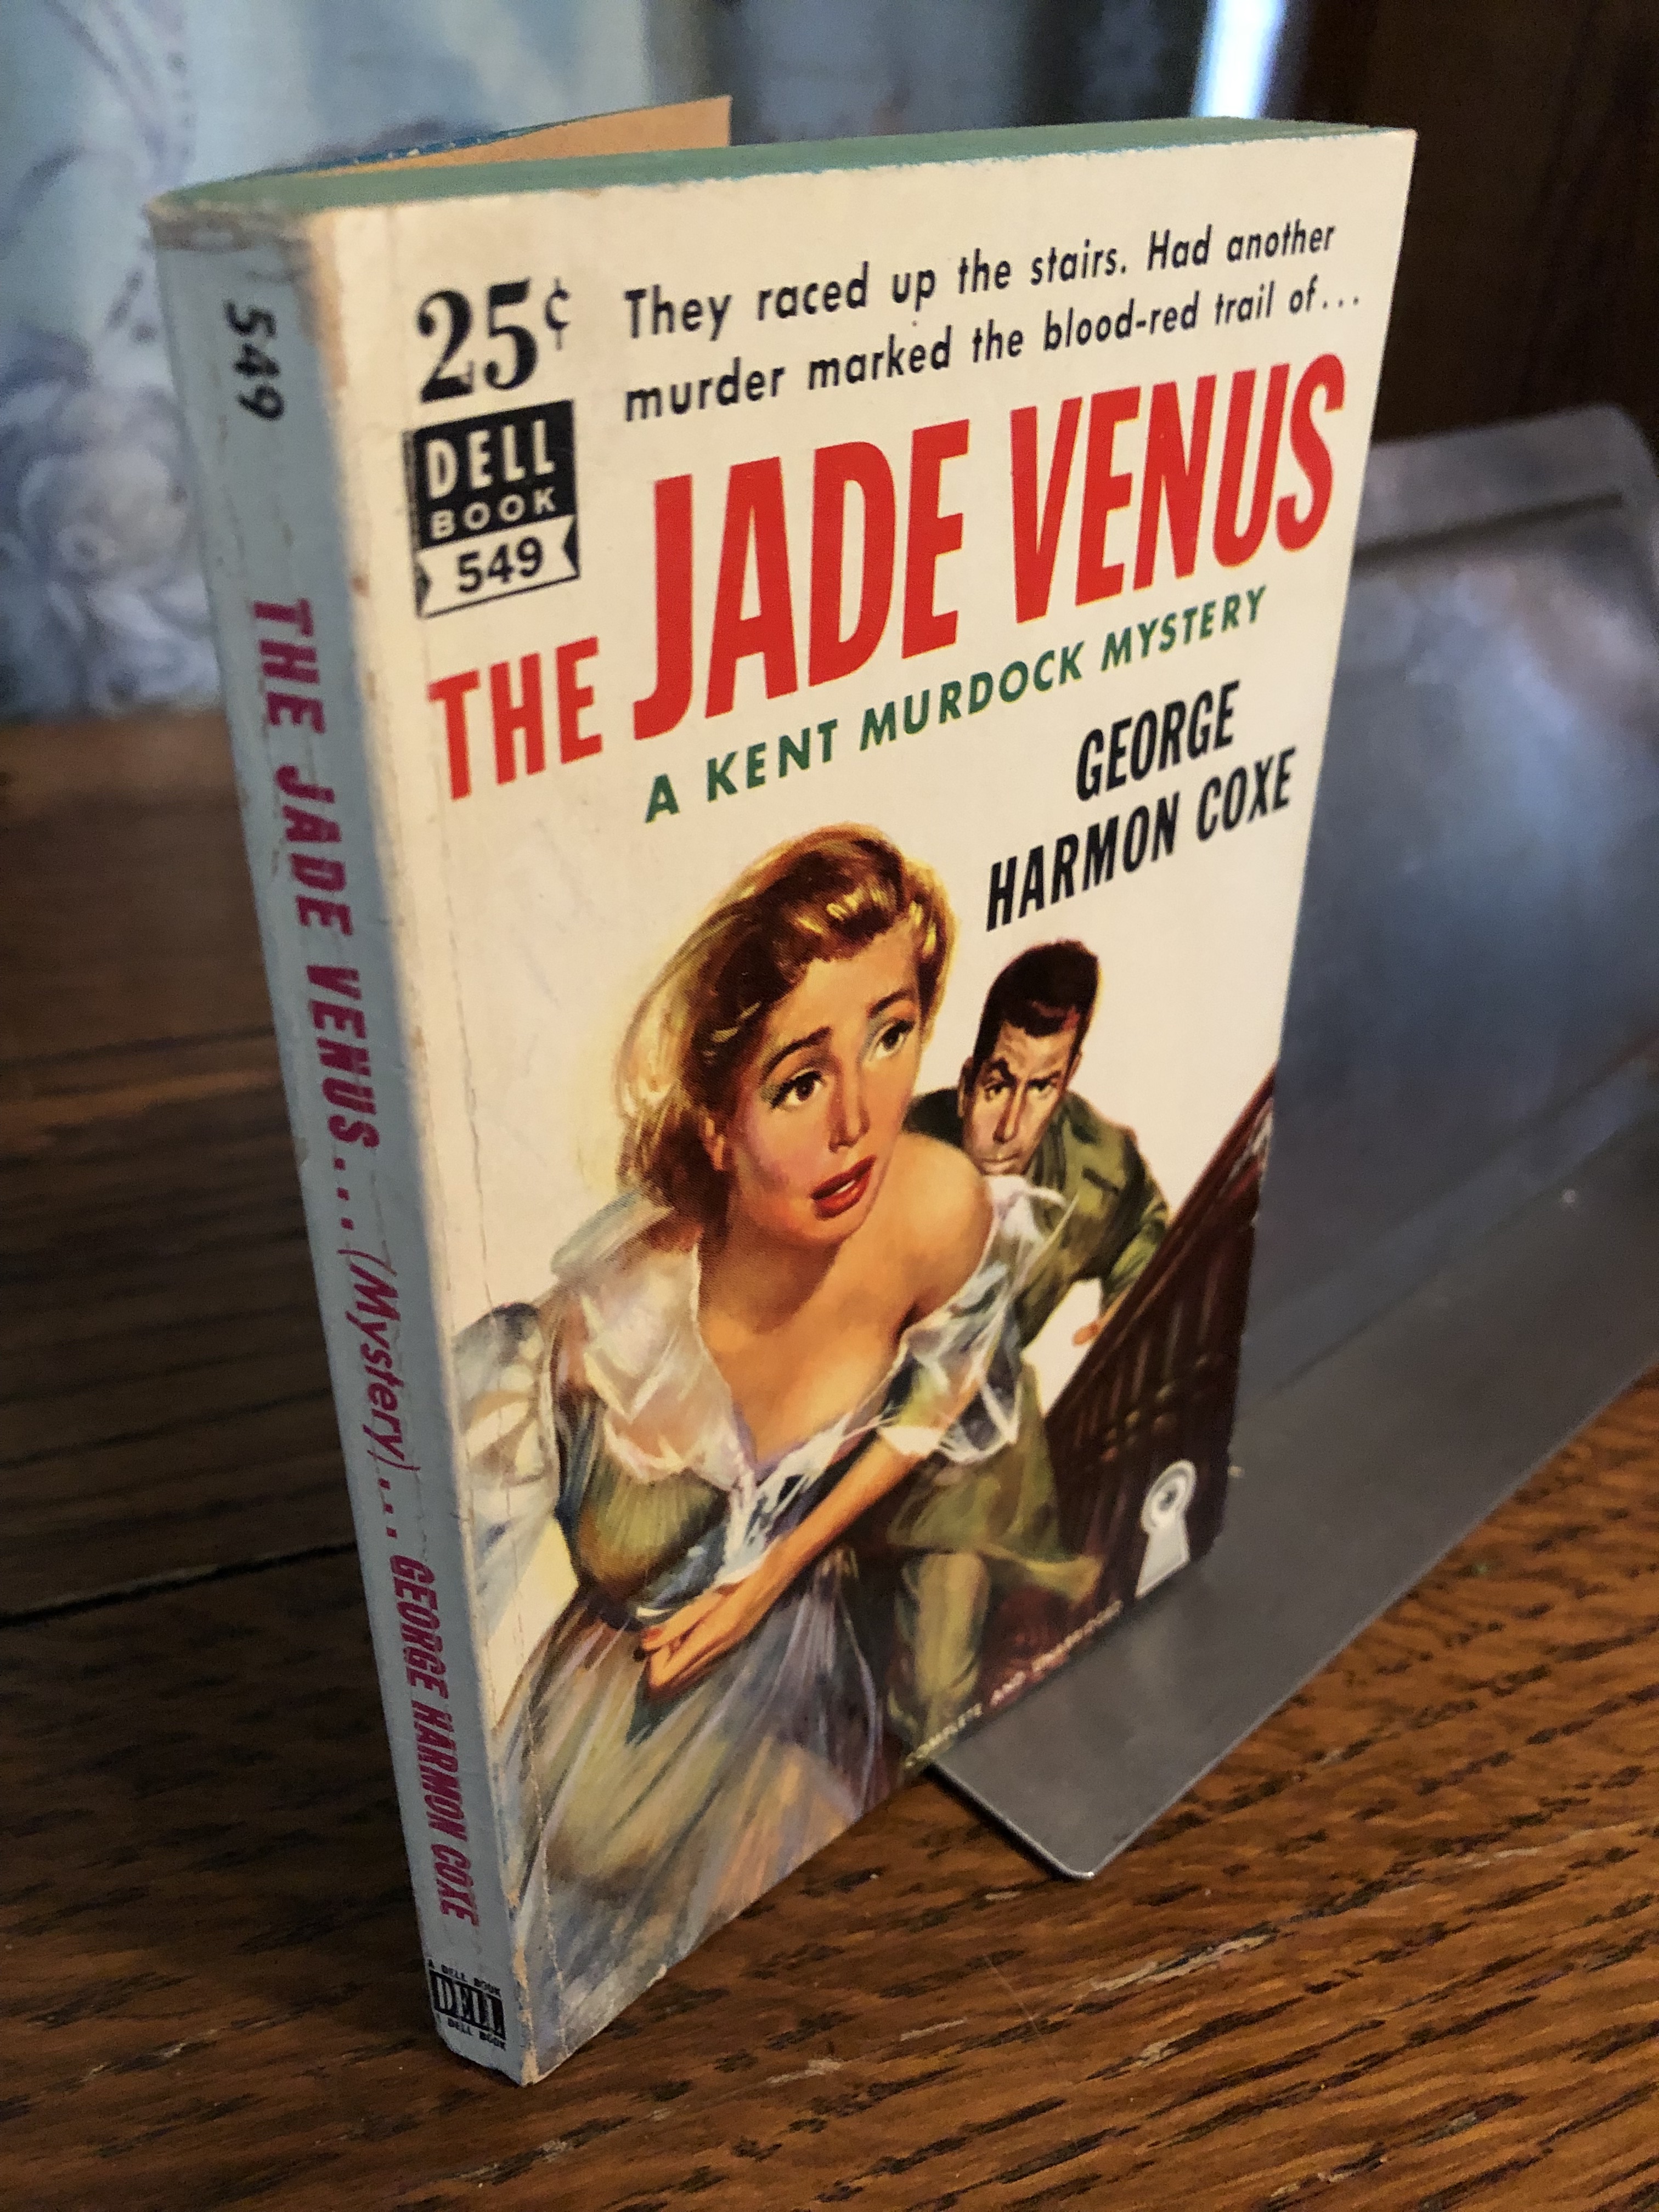 anderson shirley recommends Venus Jade